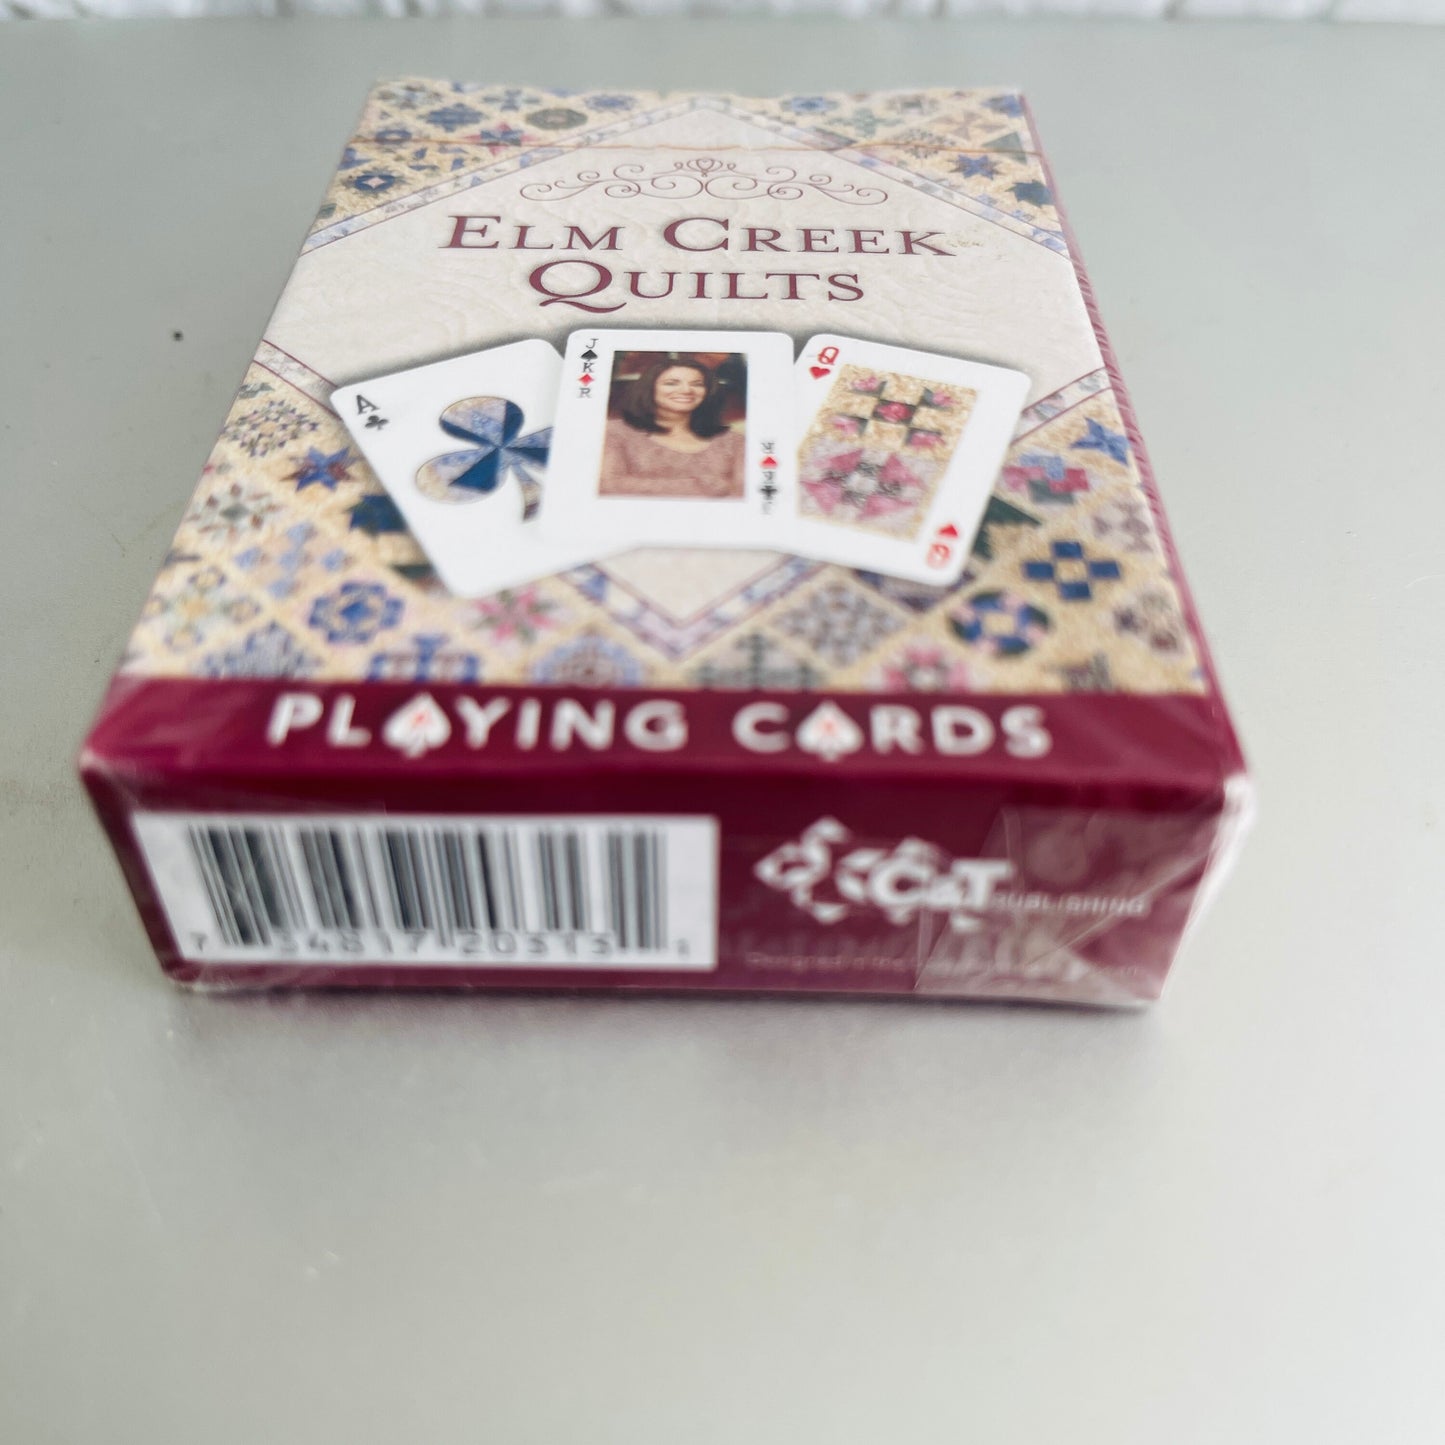 C & T Publications, Elm Creek Quilts, Playing Cards, Collectible Quilting Cards